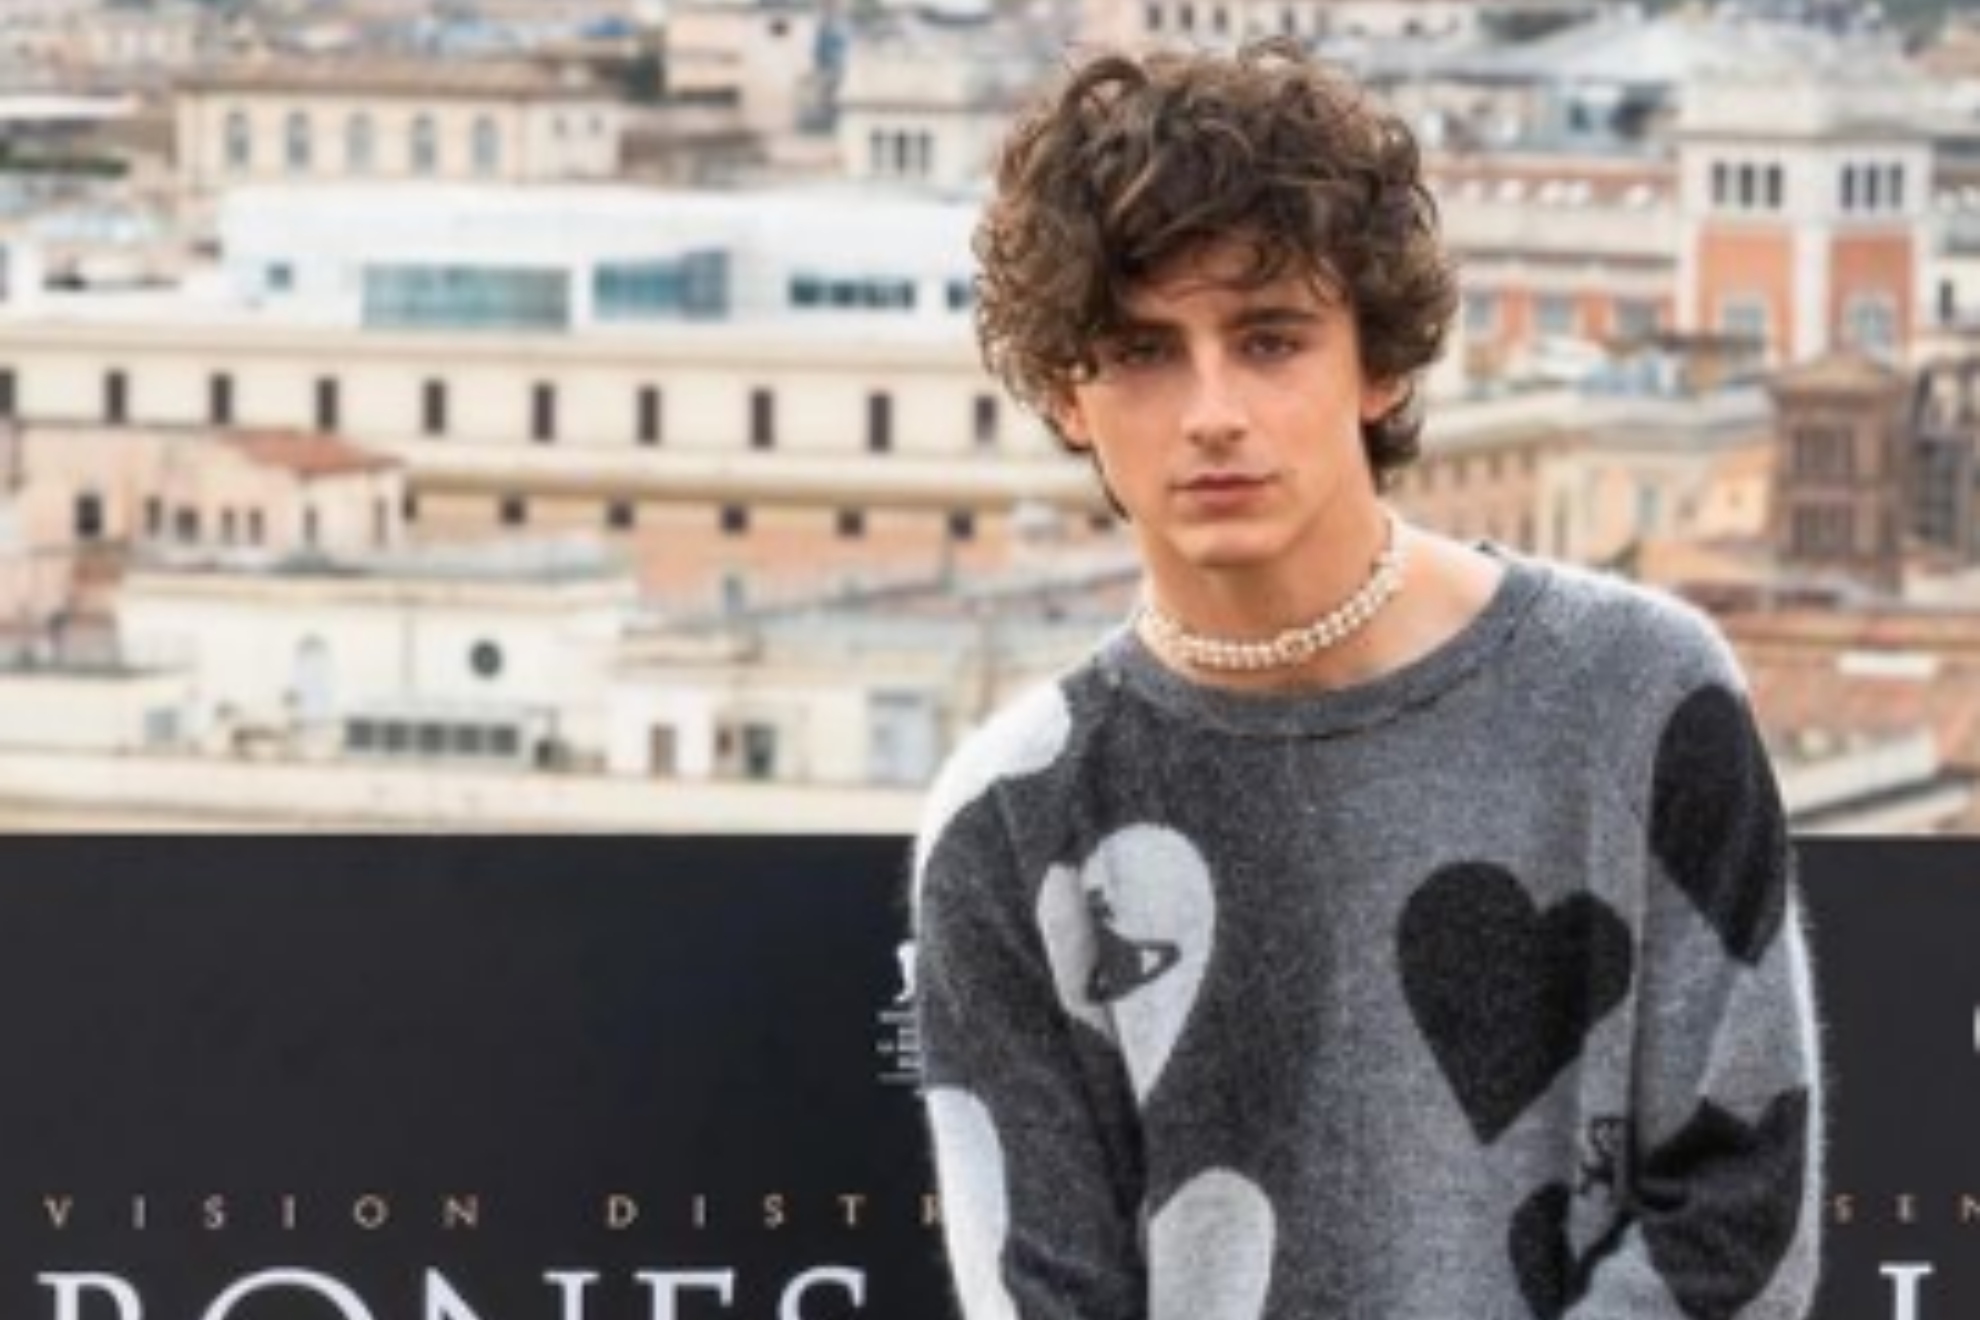 Timothée Chalamet fans mob Milan red carpet and get it canceled due to serious safety hazards